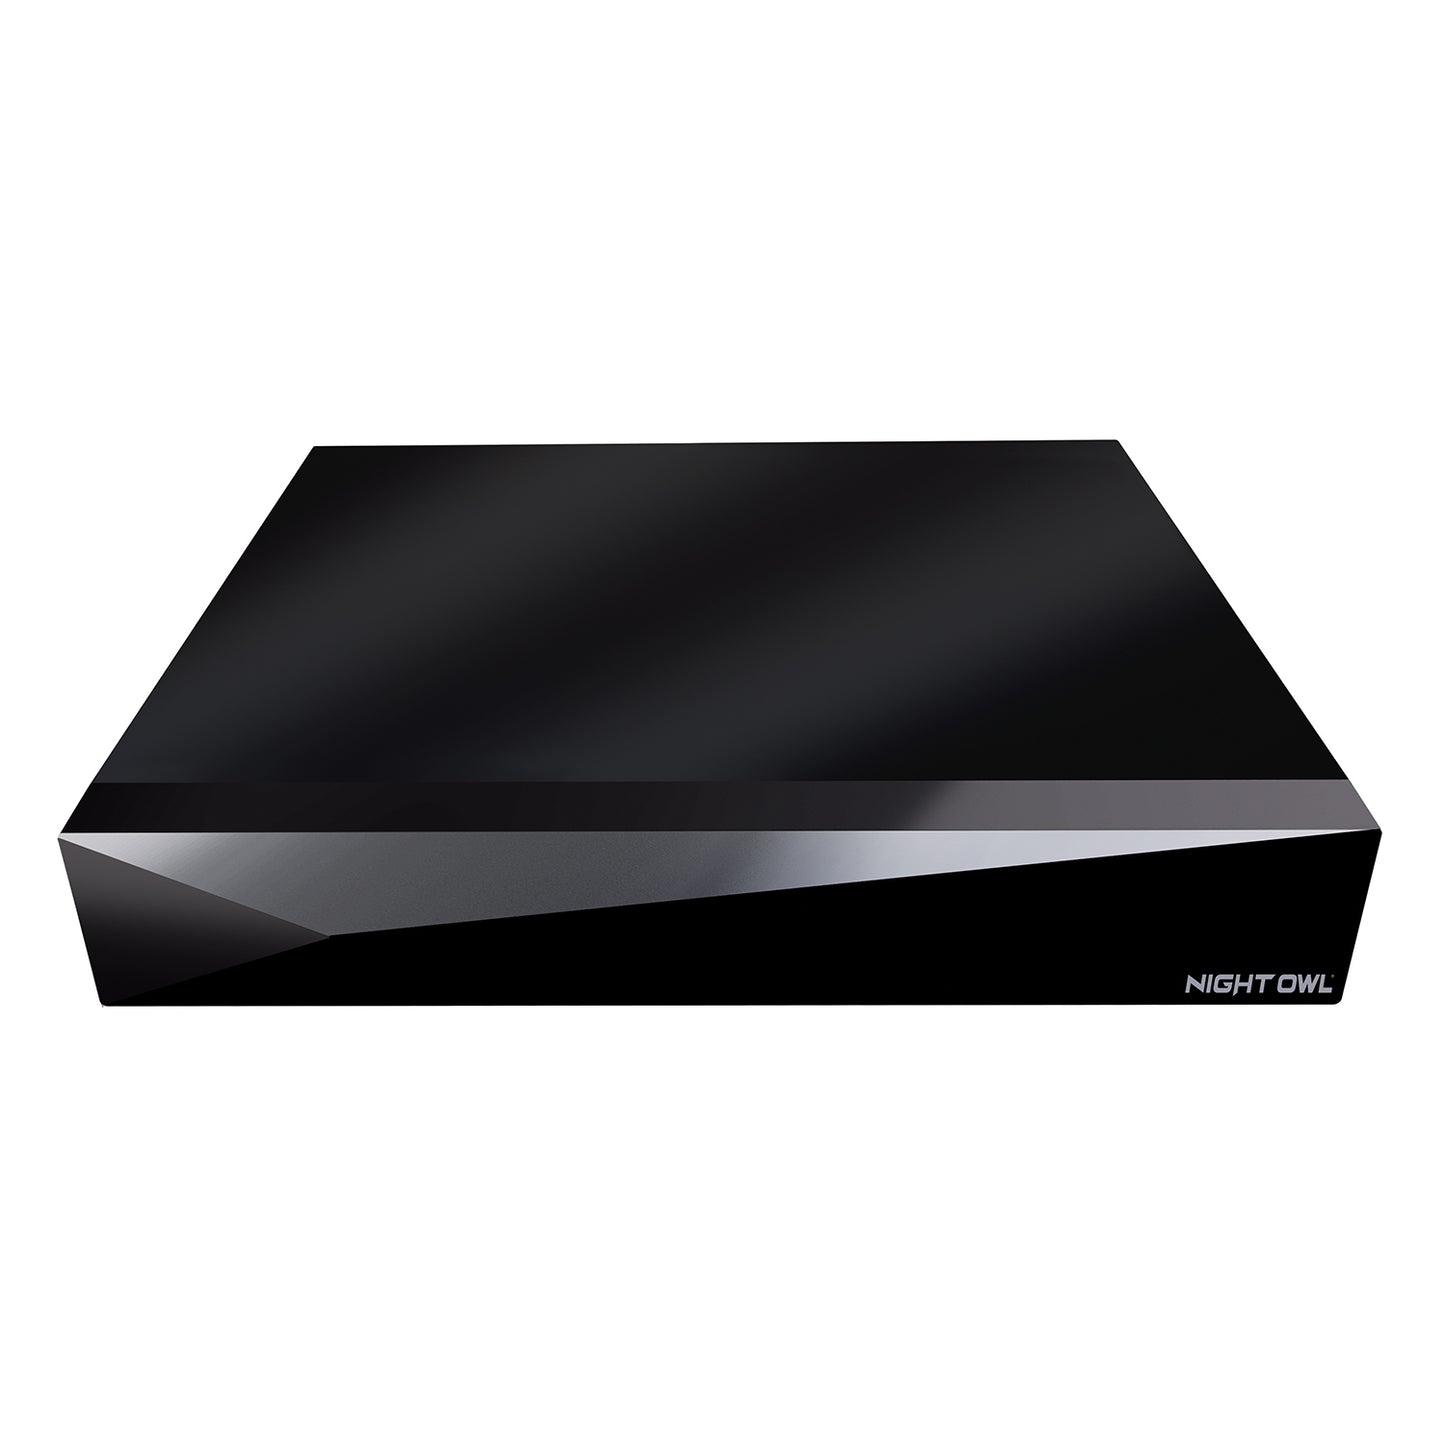 2-Way Audio 20 Channel 1080p DVR with 1TB Hard Drive - Add up to 20 Total Devices